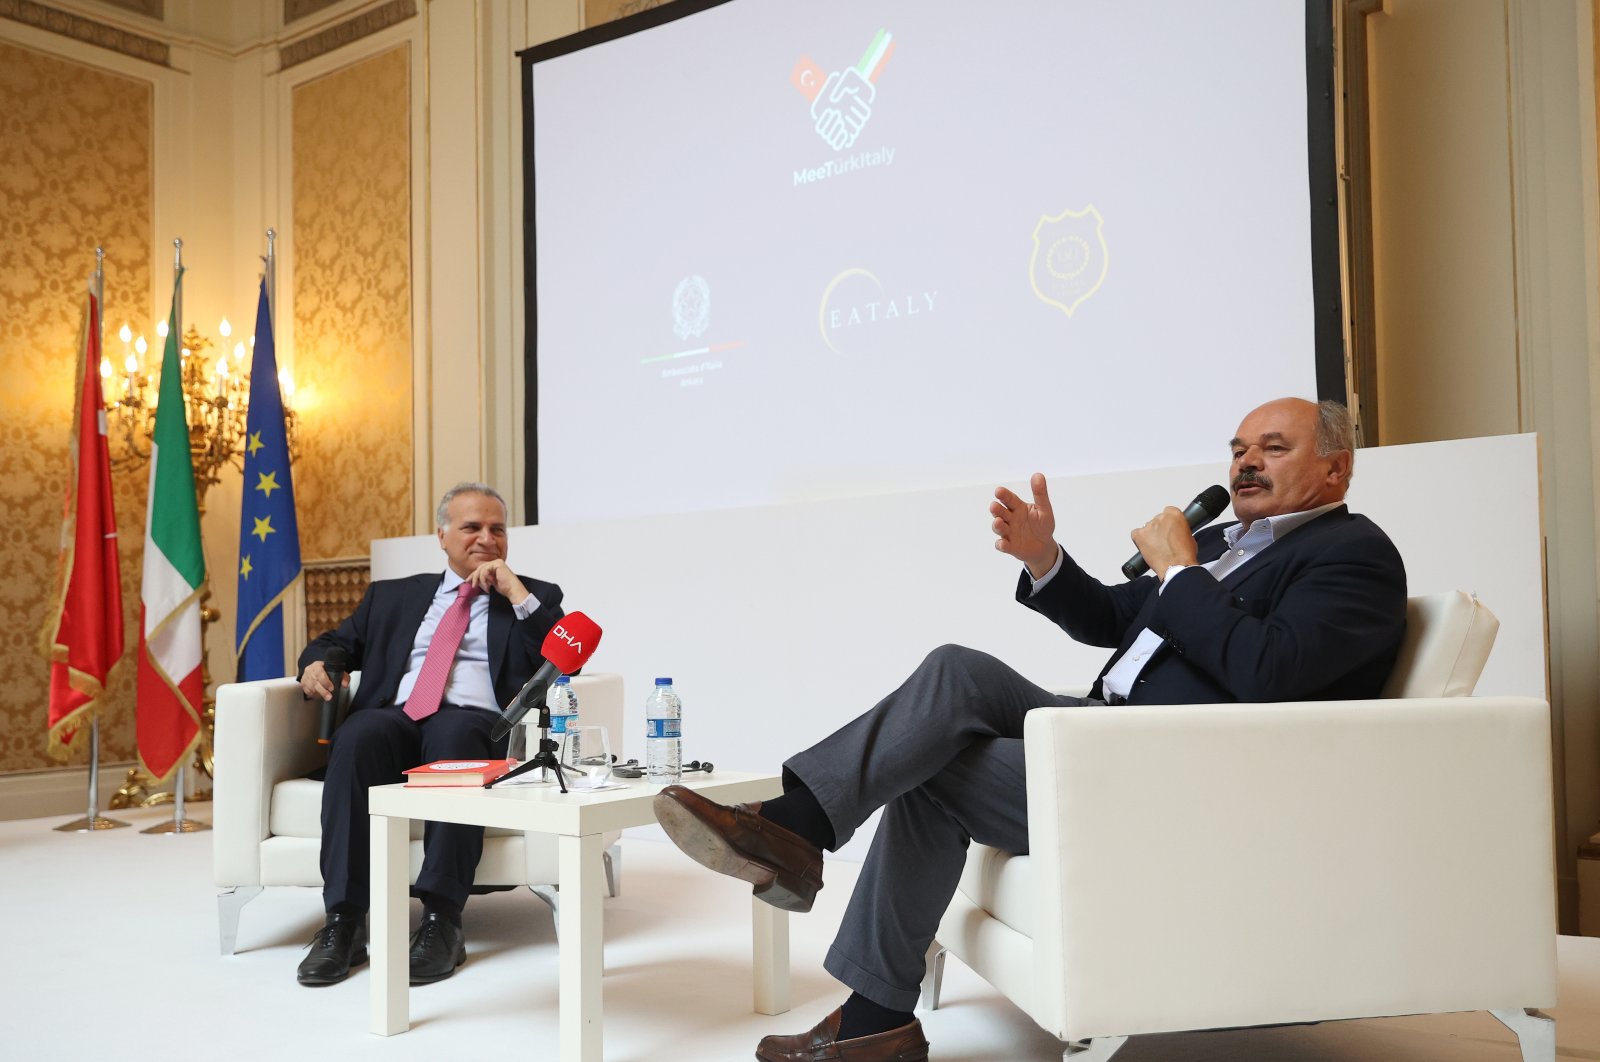 The fourth installment of the program series titled &quot;MeeTürkItaly,&quot; aimed at strengthening Turkish-Italian relations, as Italian Ambassador Giorgio Marrapodi (L) and Oscar Farinetti, the founder of Eataly Restaurant participate in the program, Istanbul, Türkiye, June 7, 2023. (AA Photo)